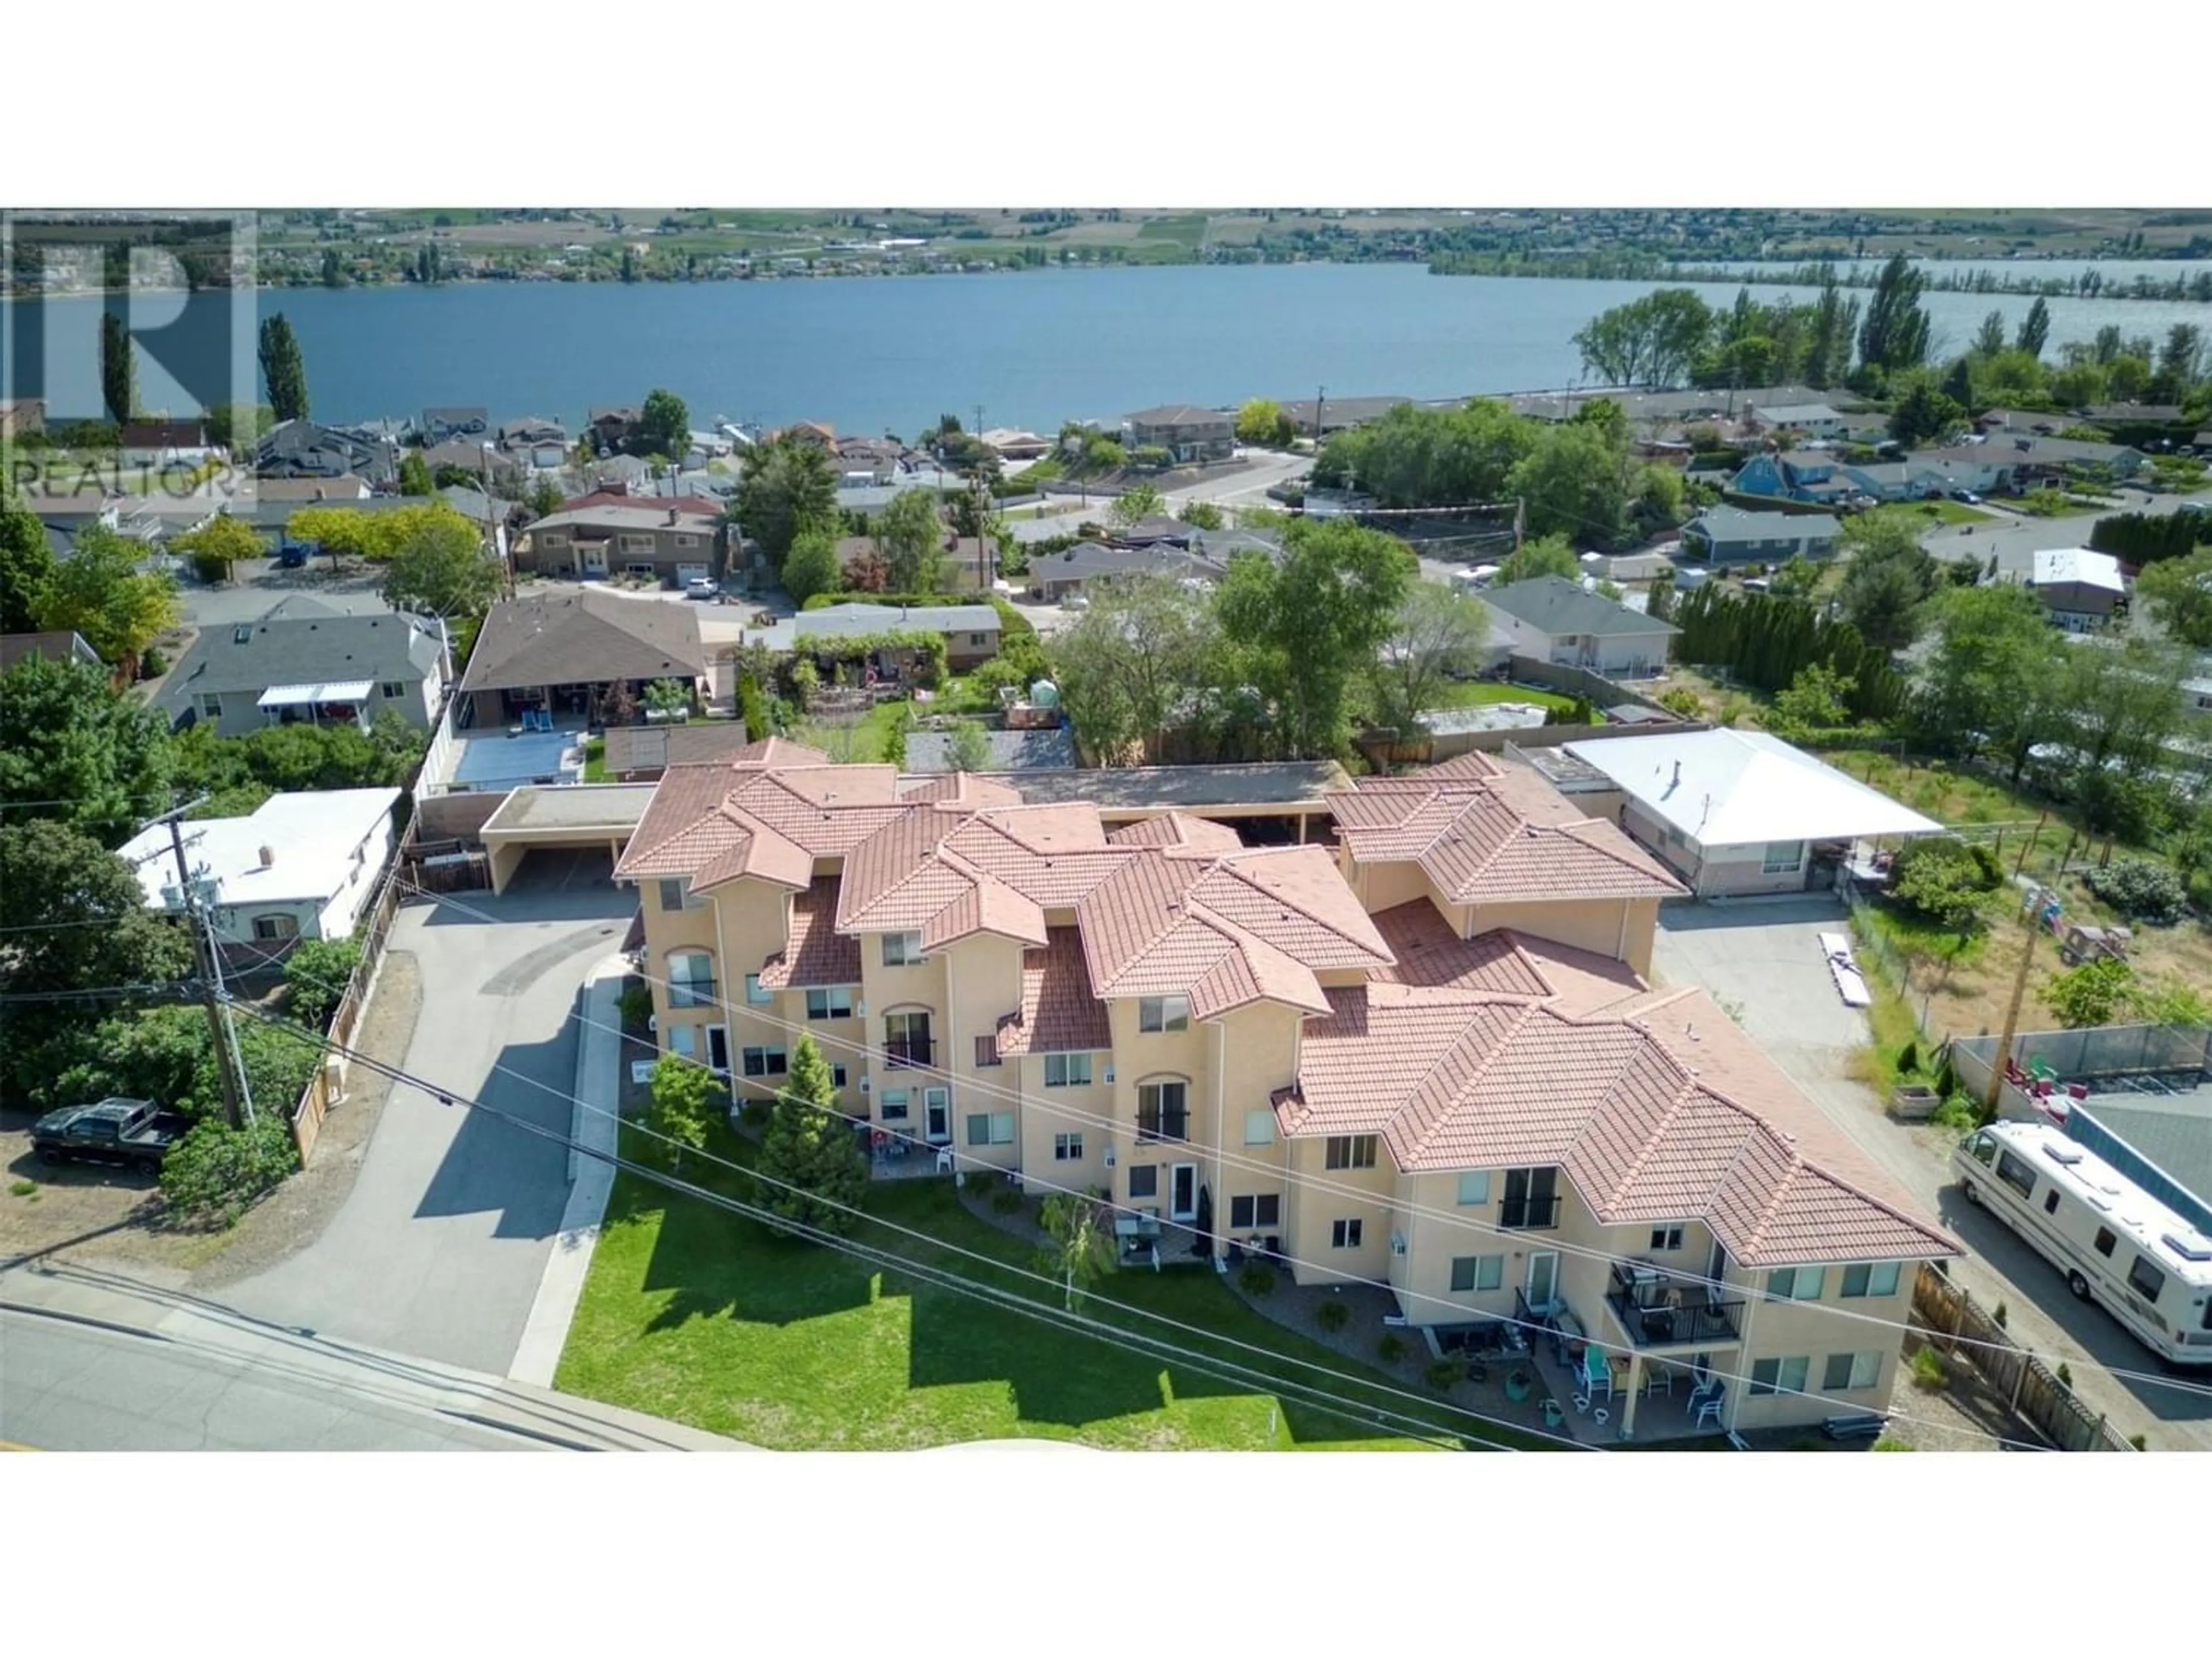 Lakeview for 4809 89TH Street Unit# 102, Osoyoos British Columbia V0H1V4